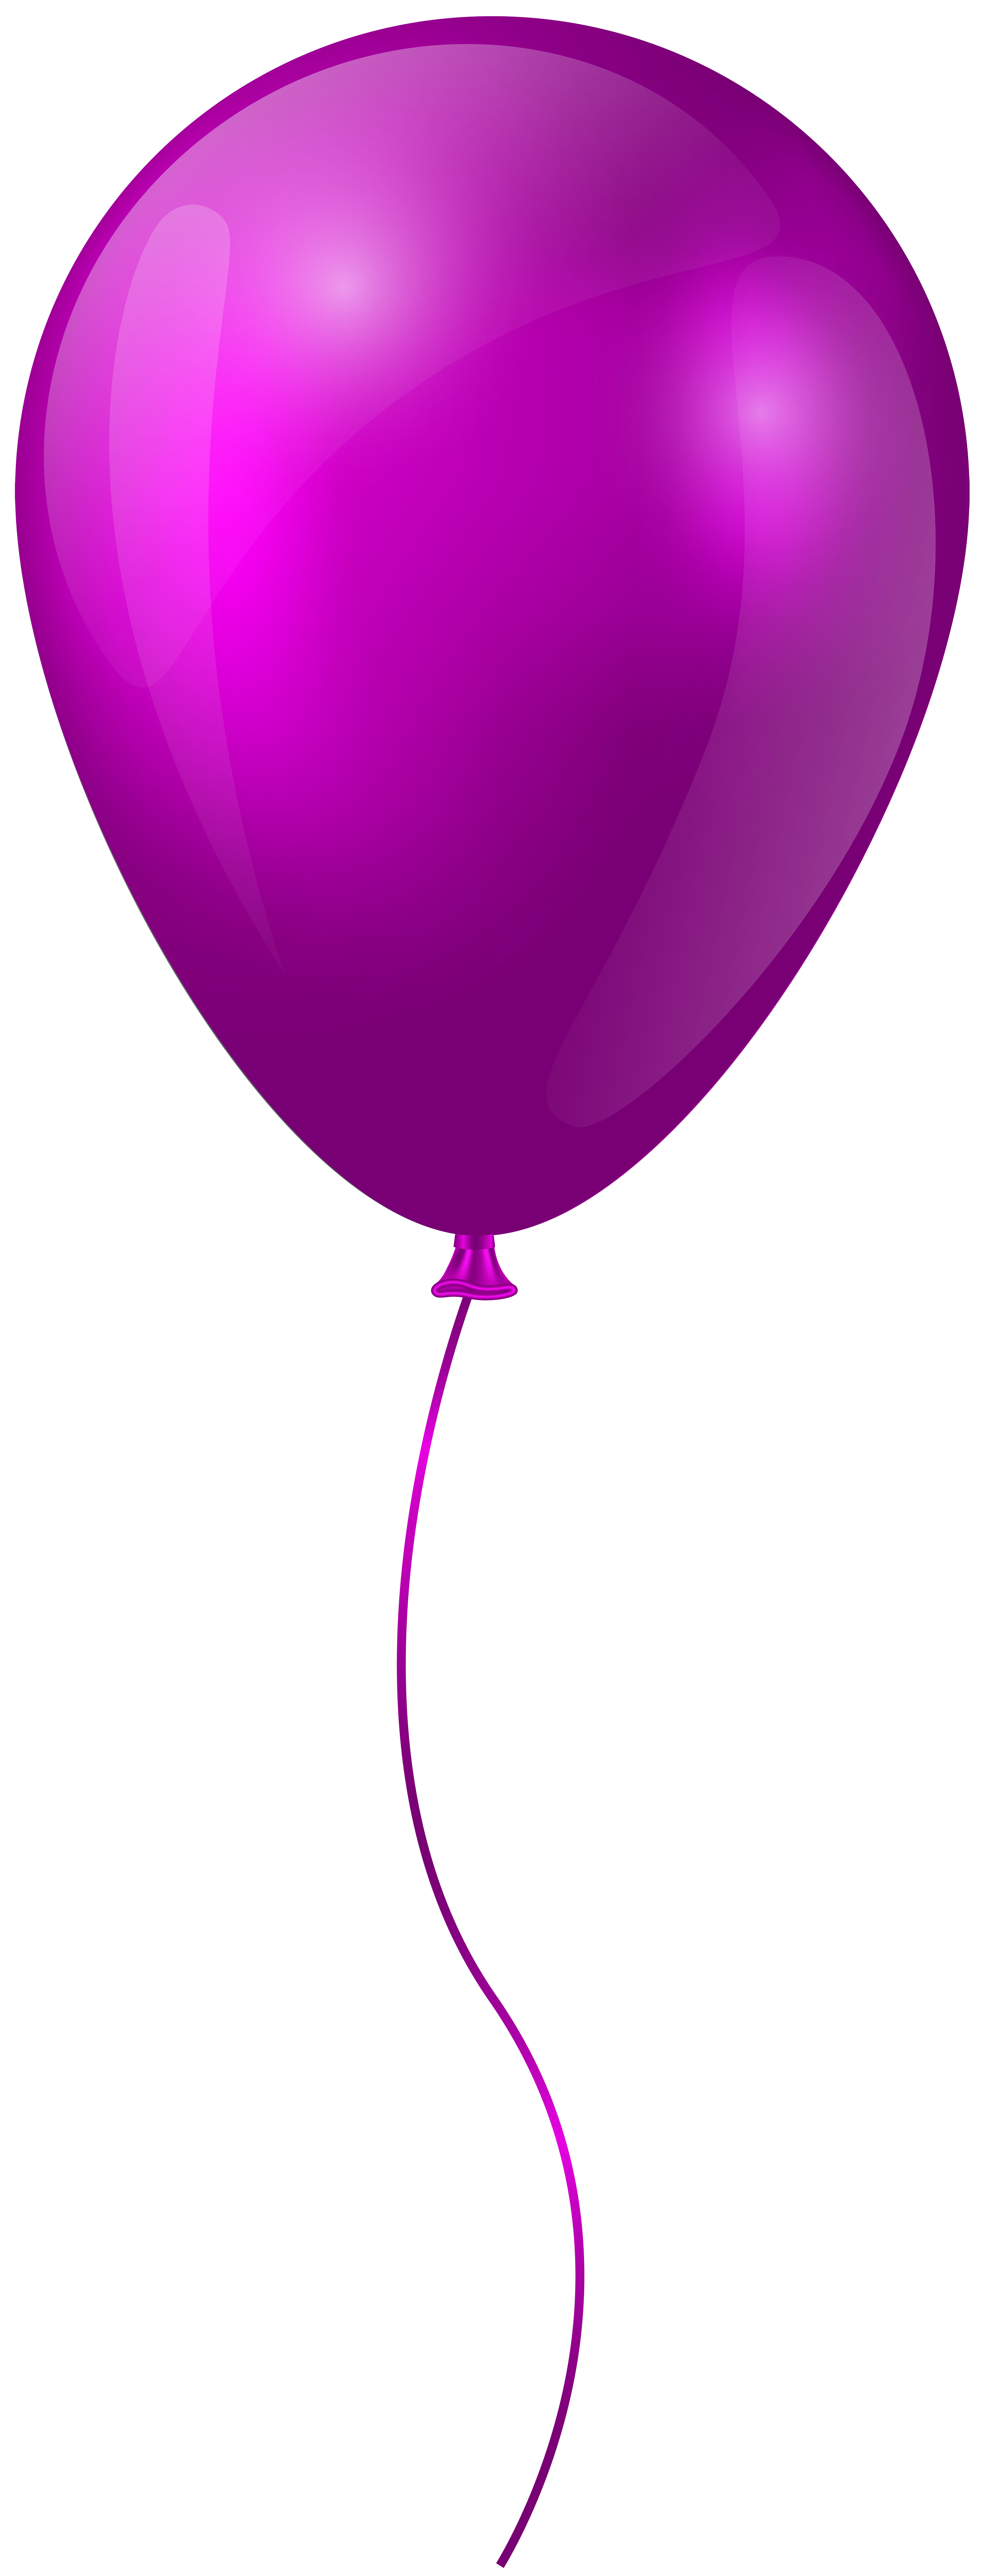 Purple Background Decoration Transparent PNG Clip Art Image​  Gallery  Yopriceville - High-Quality Free Images and Transparent PNG Clipart